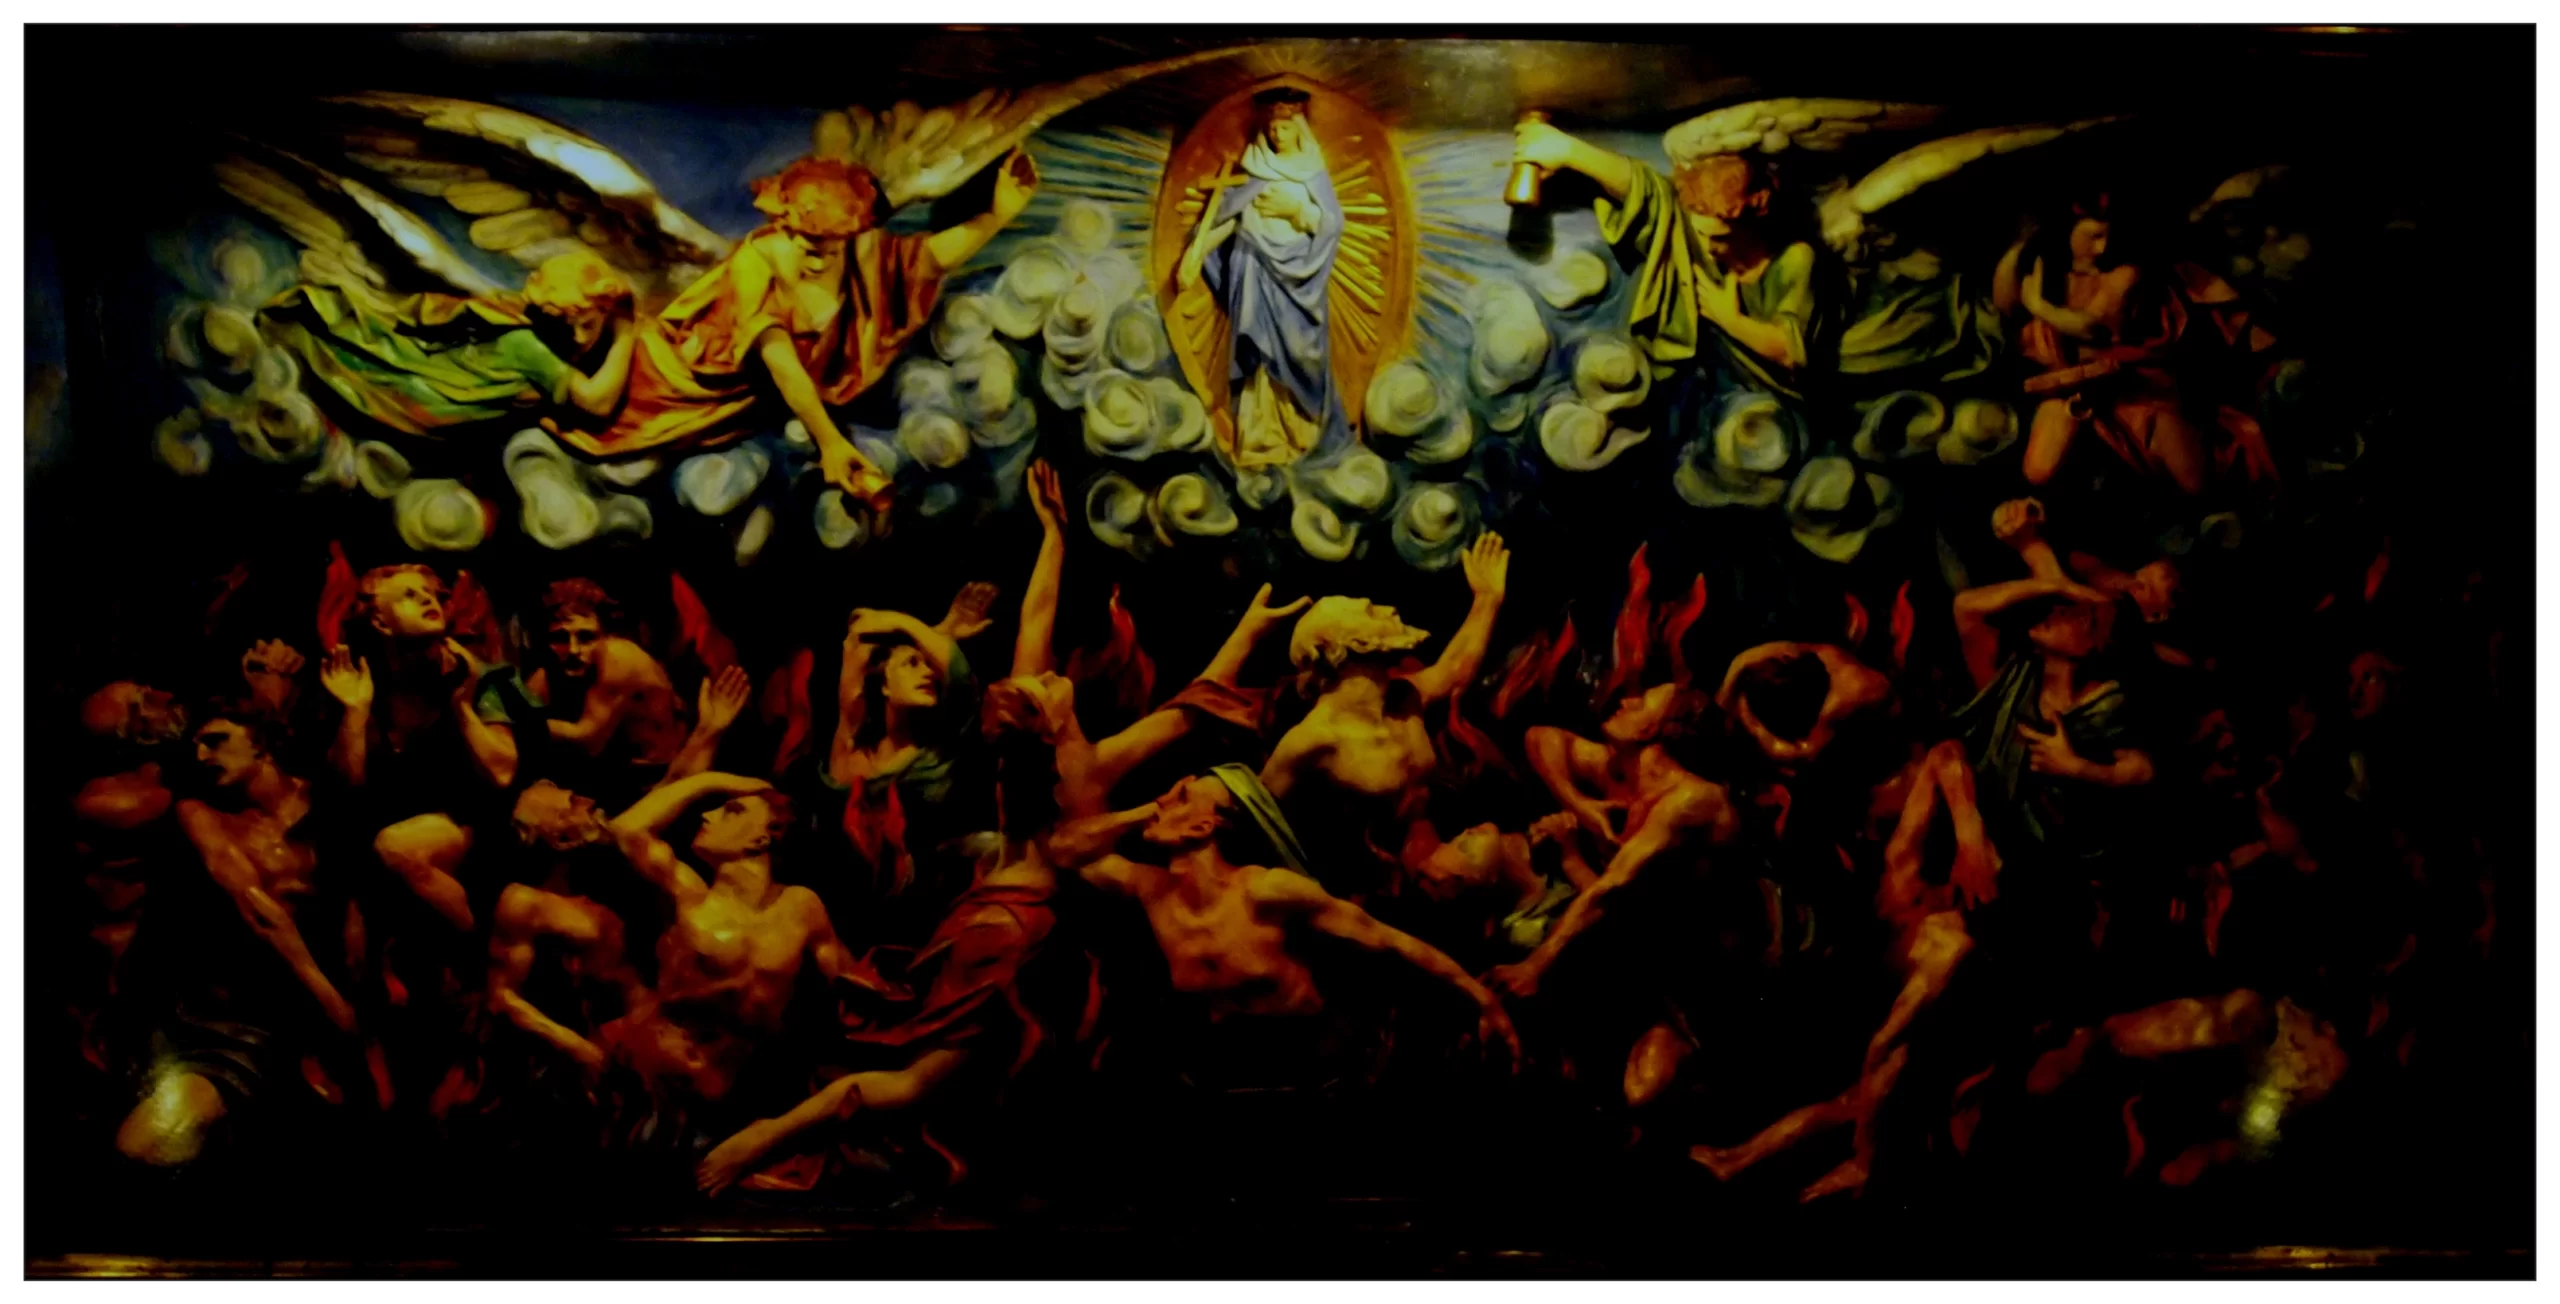 PRAY FOR SOULS IN PURGATORY